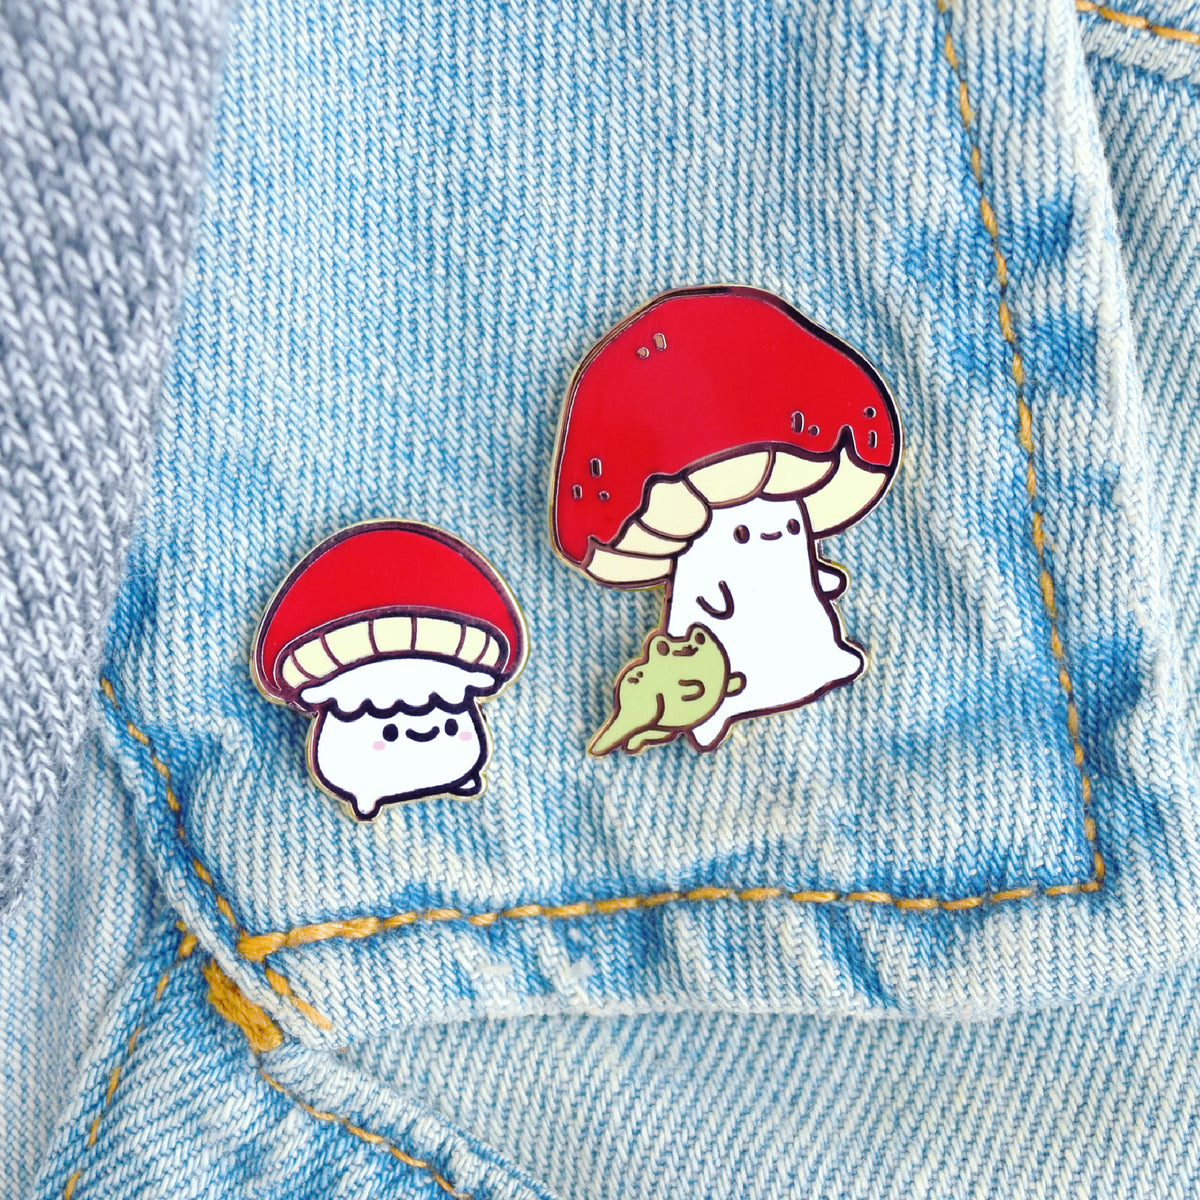 Moss: Onion and Other Unusual Frogs Enamel Pin